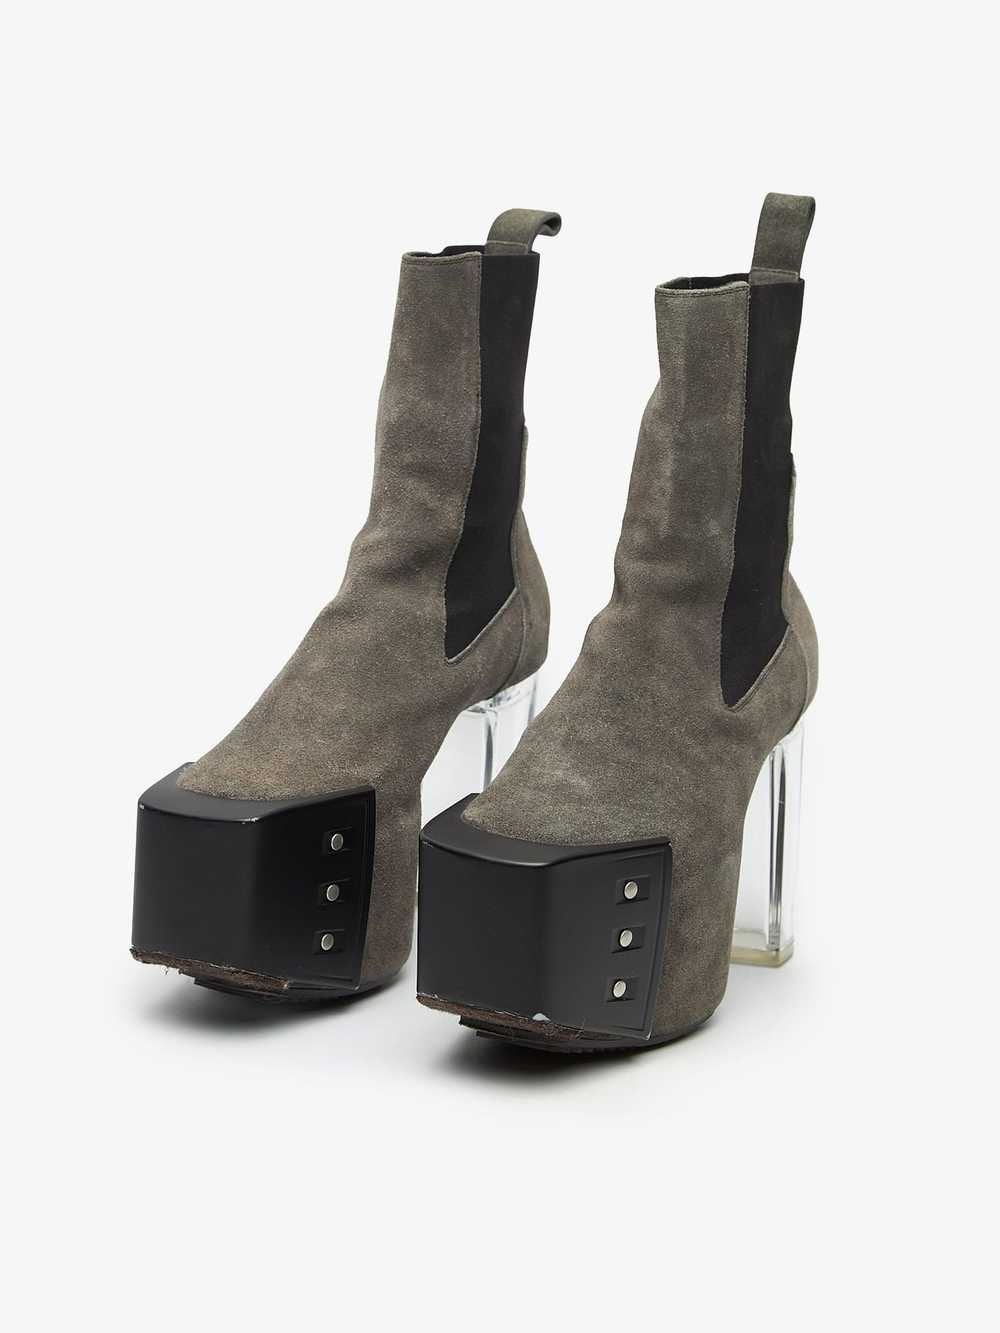 Rick Owens Gray Suede Kiss Suede Heel Boots - image 2